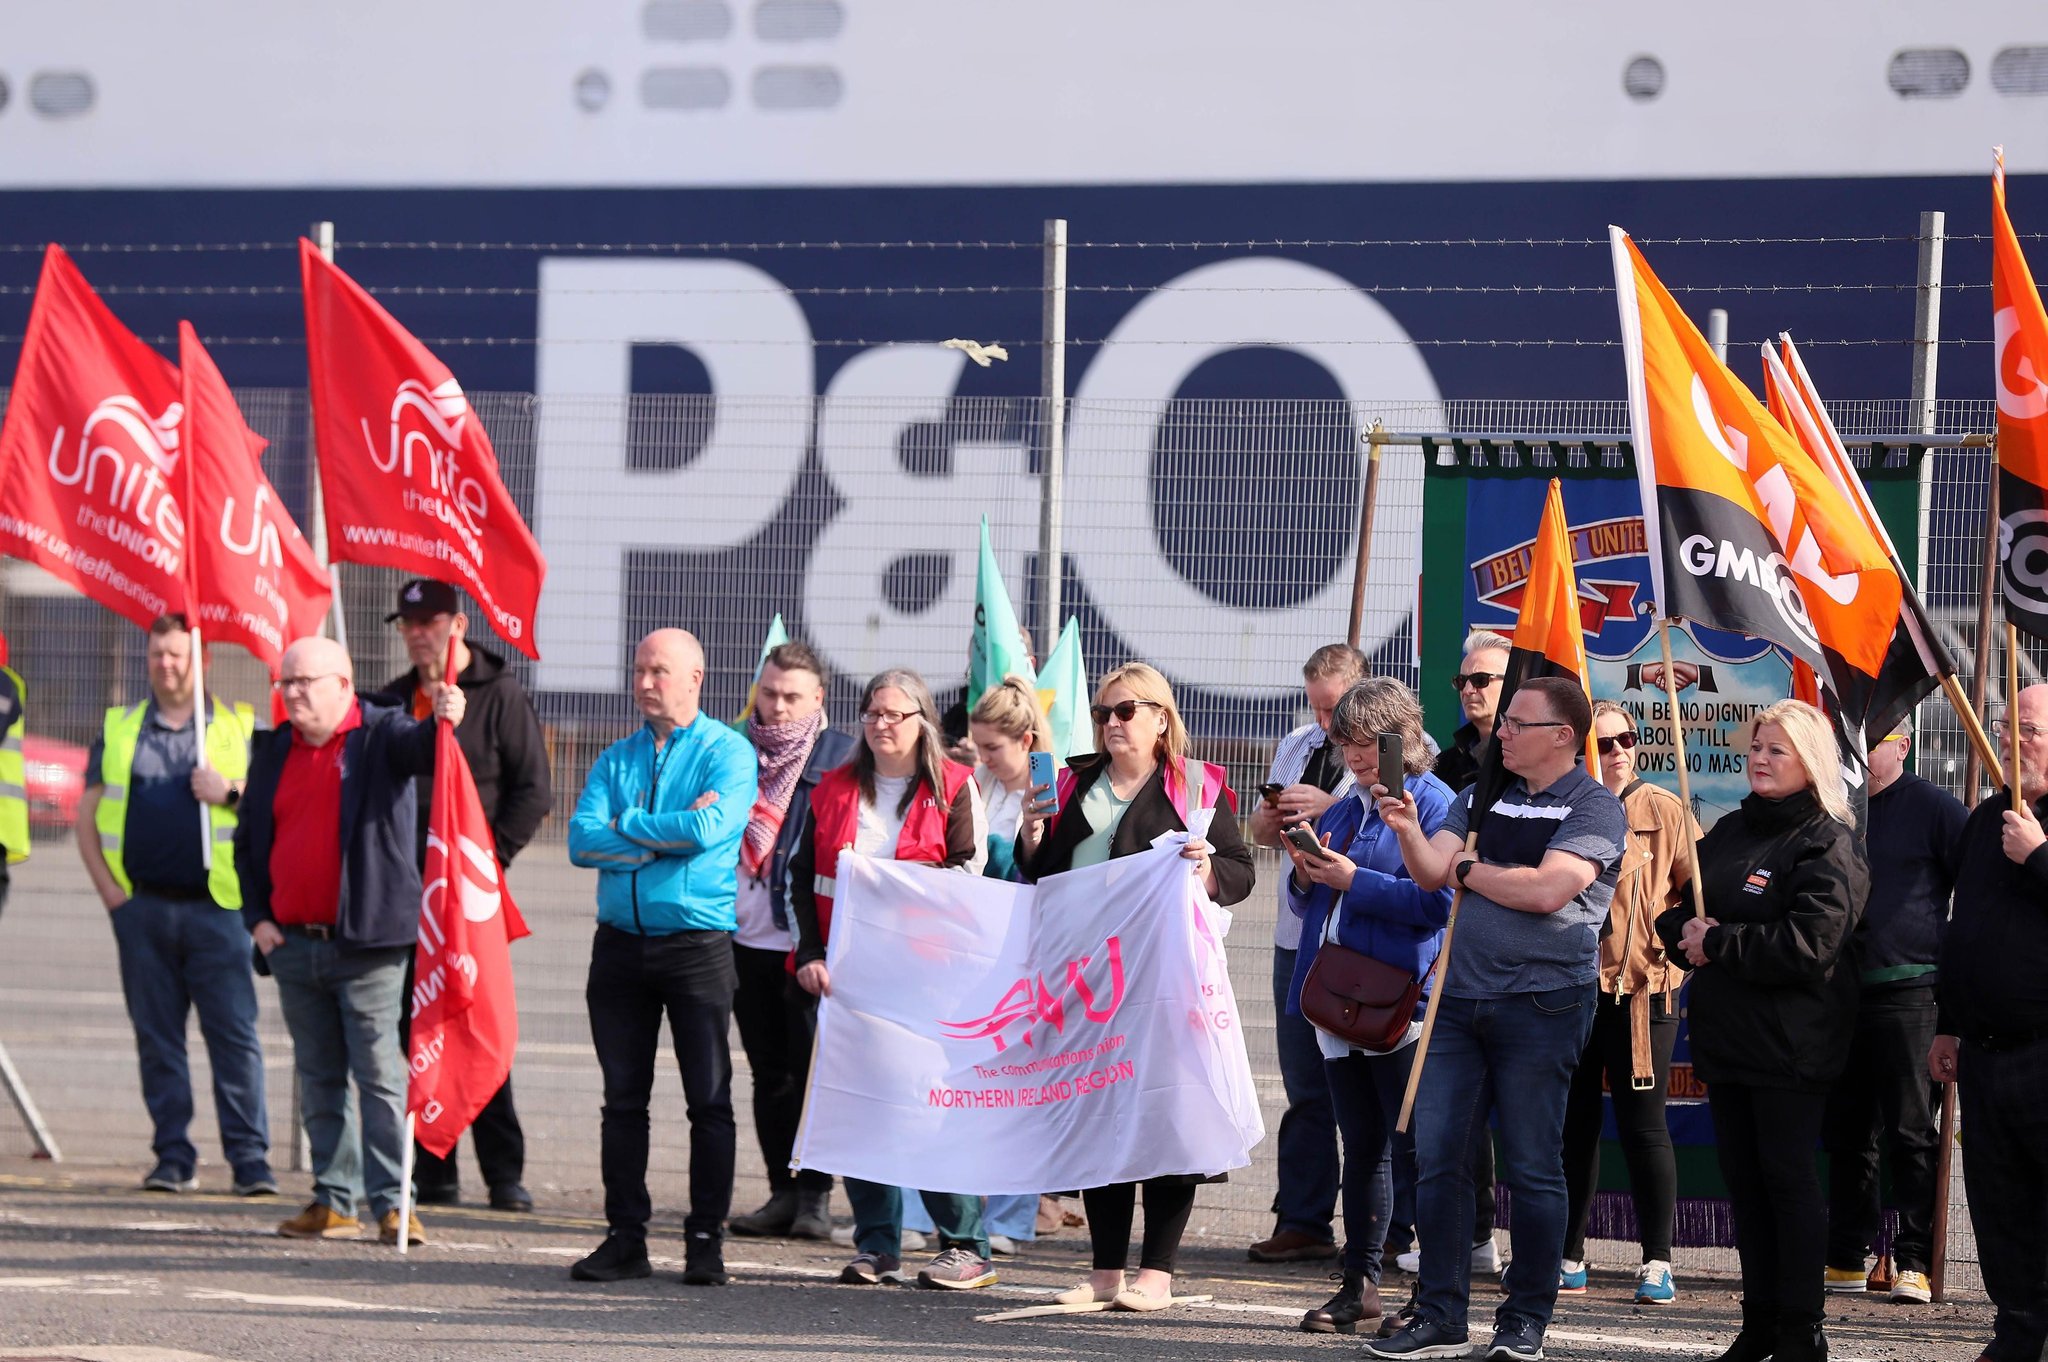 P&O Ferries refuses plea from Grant Shapps to reverse decision to sack workers